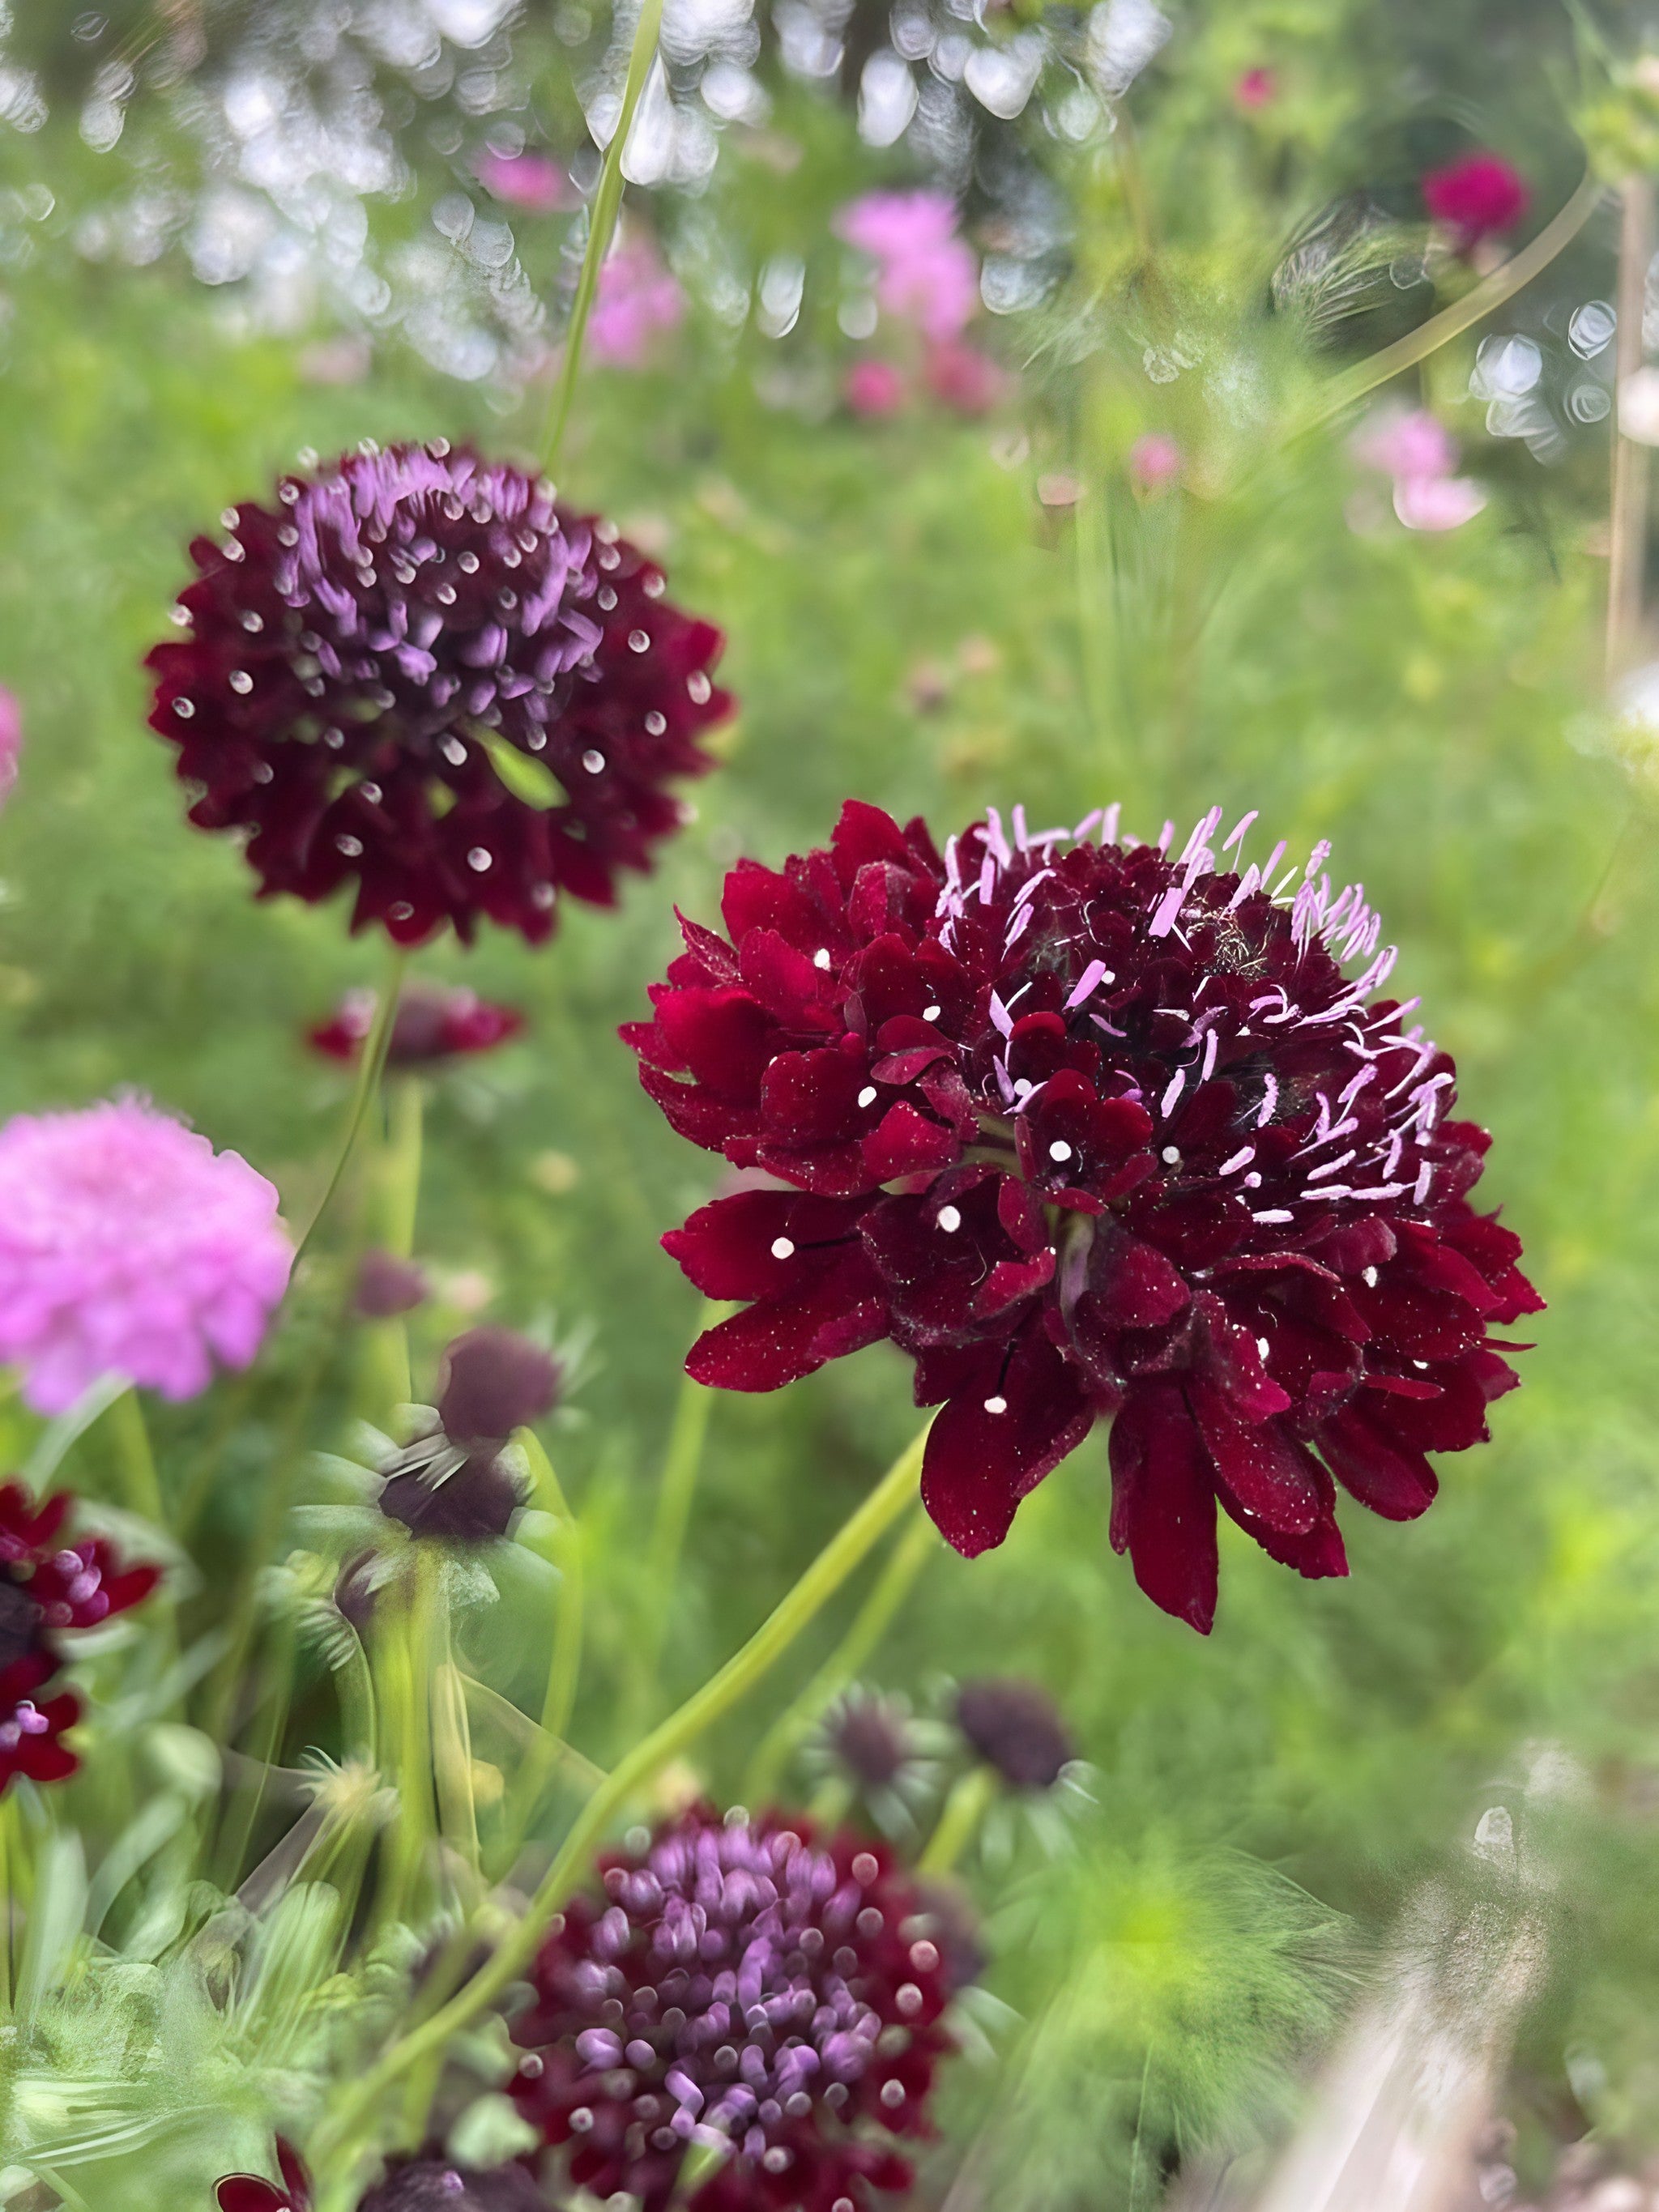 Scabious Black Knight flowers adding a touch of deep purple to a garden setting